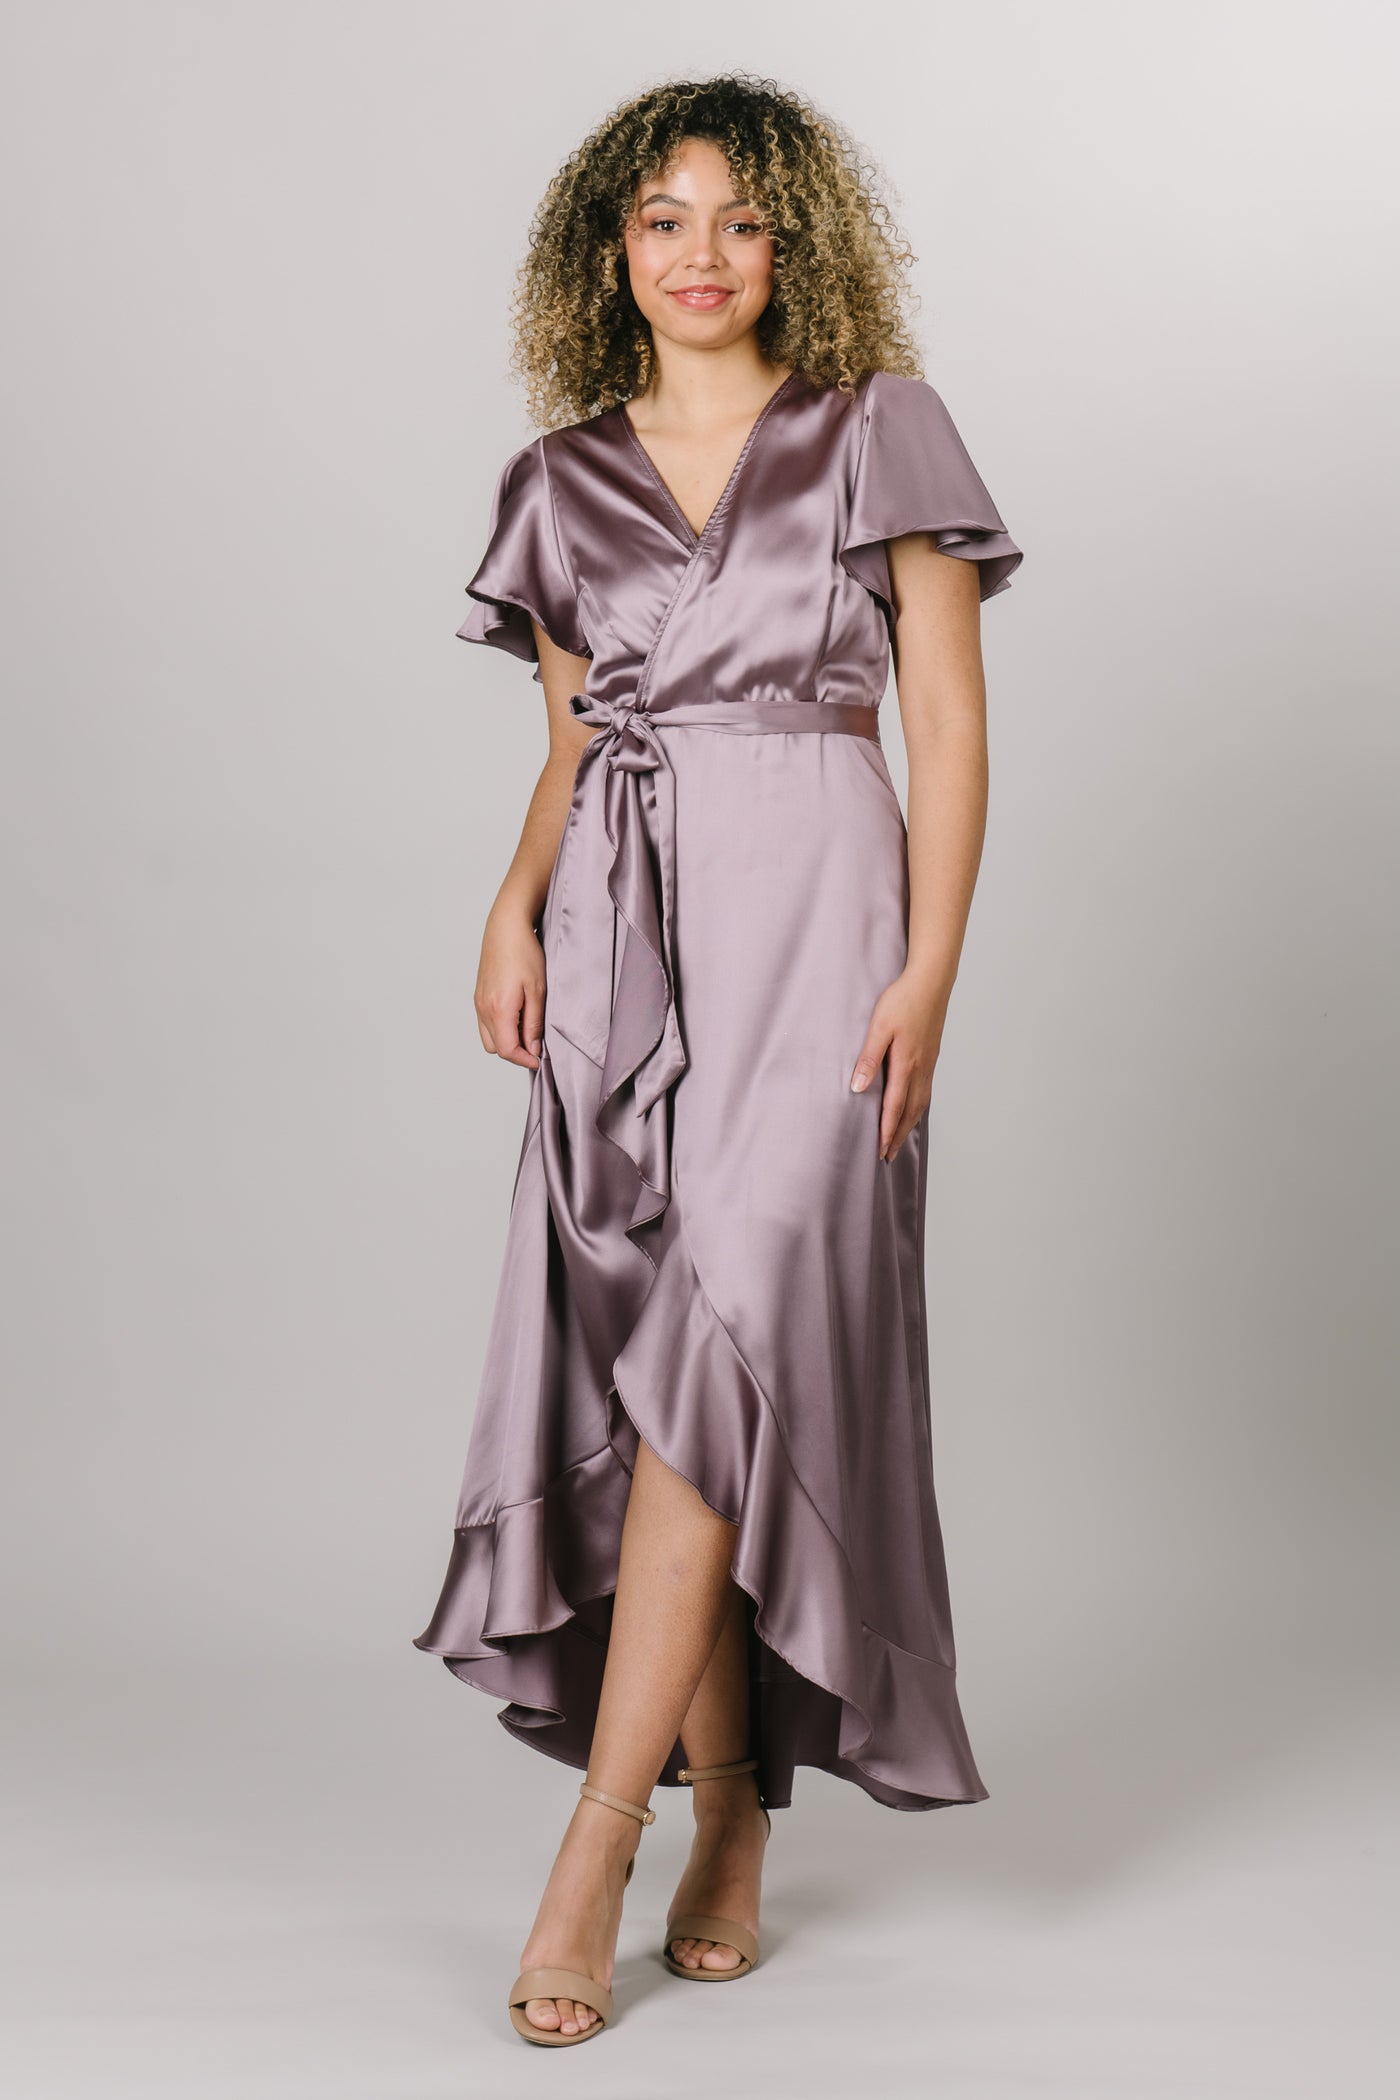 A satin dress in light mauve, it wraps and you can tie it with a bow. Modest Dresses - - Everyday Dresses - Modest Prom Dress - Formalwear Modest Dresses - Bridesmaid Modest Dresses.